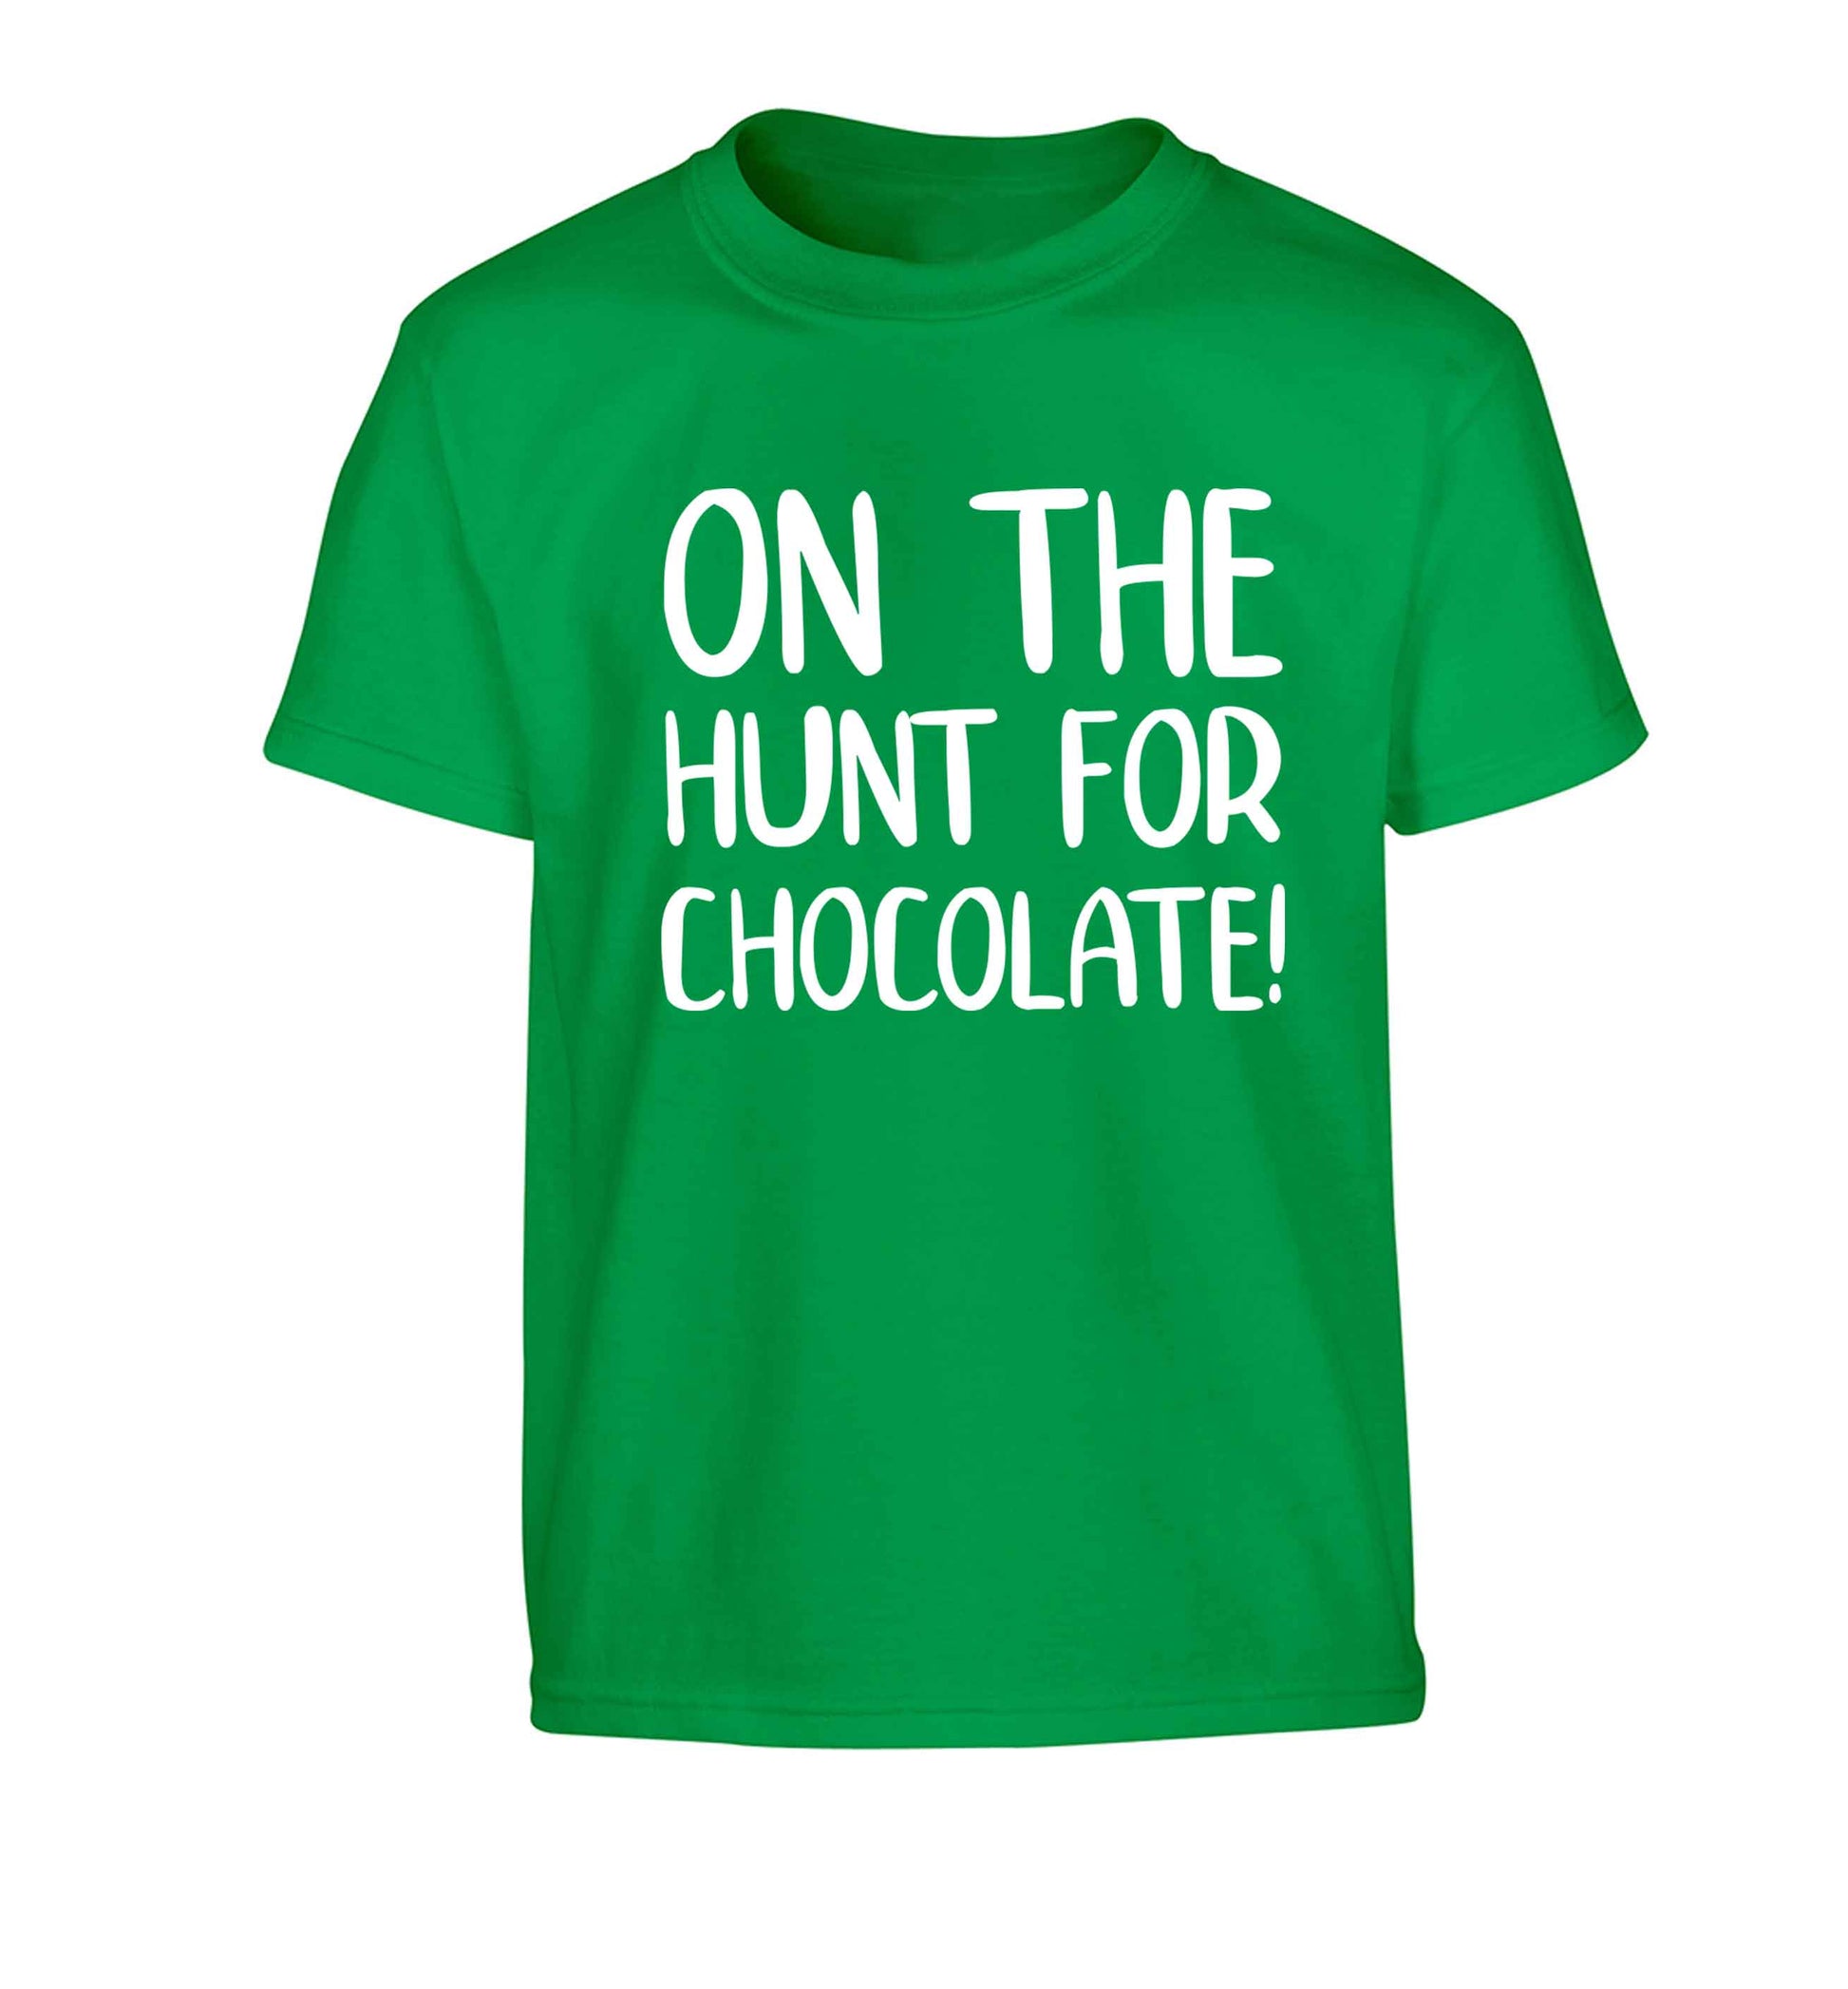 On the hunt for chocolate! Children's green Tshirt 12-13 Years